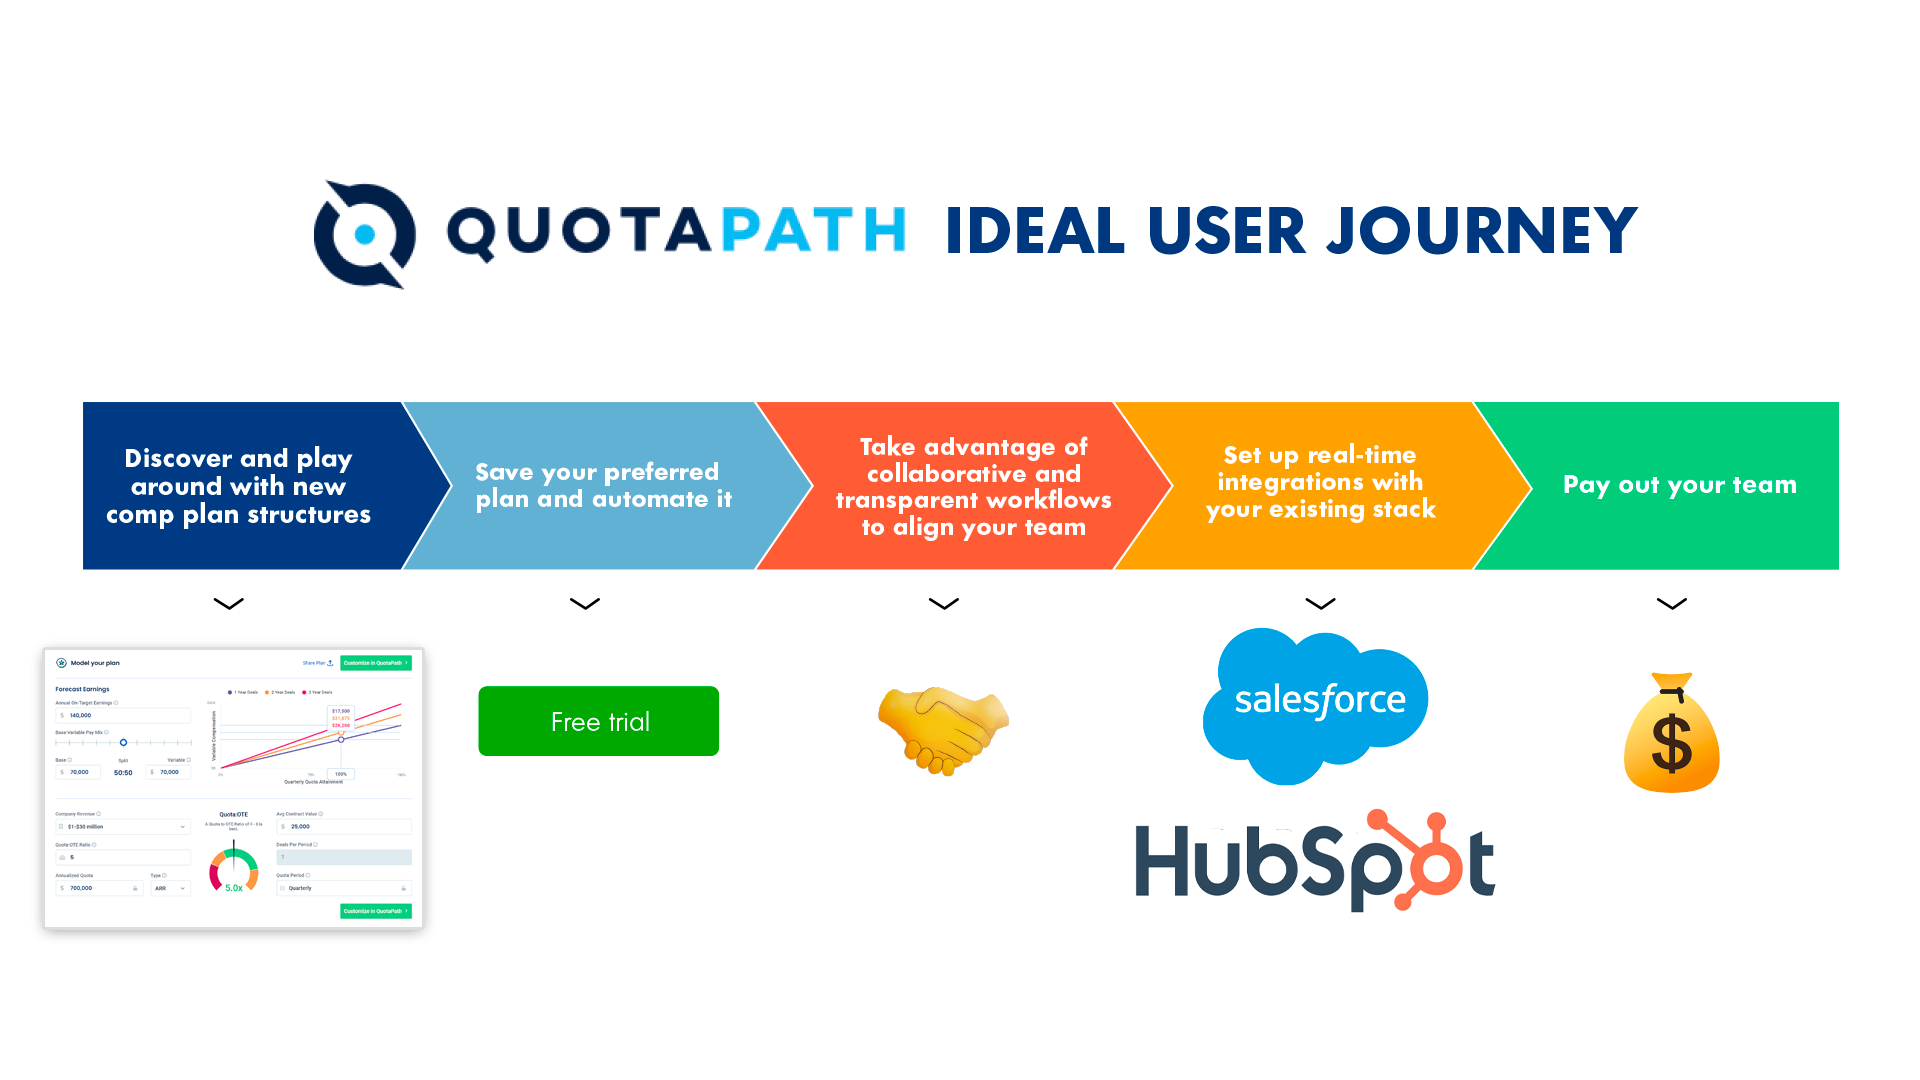 QuotaPath's ideal timeline for the new user journey.